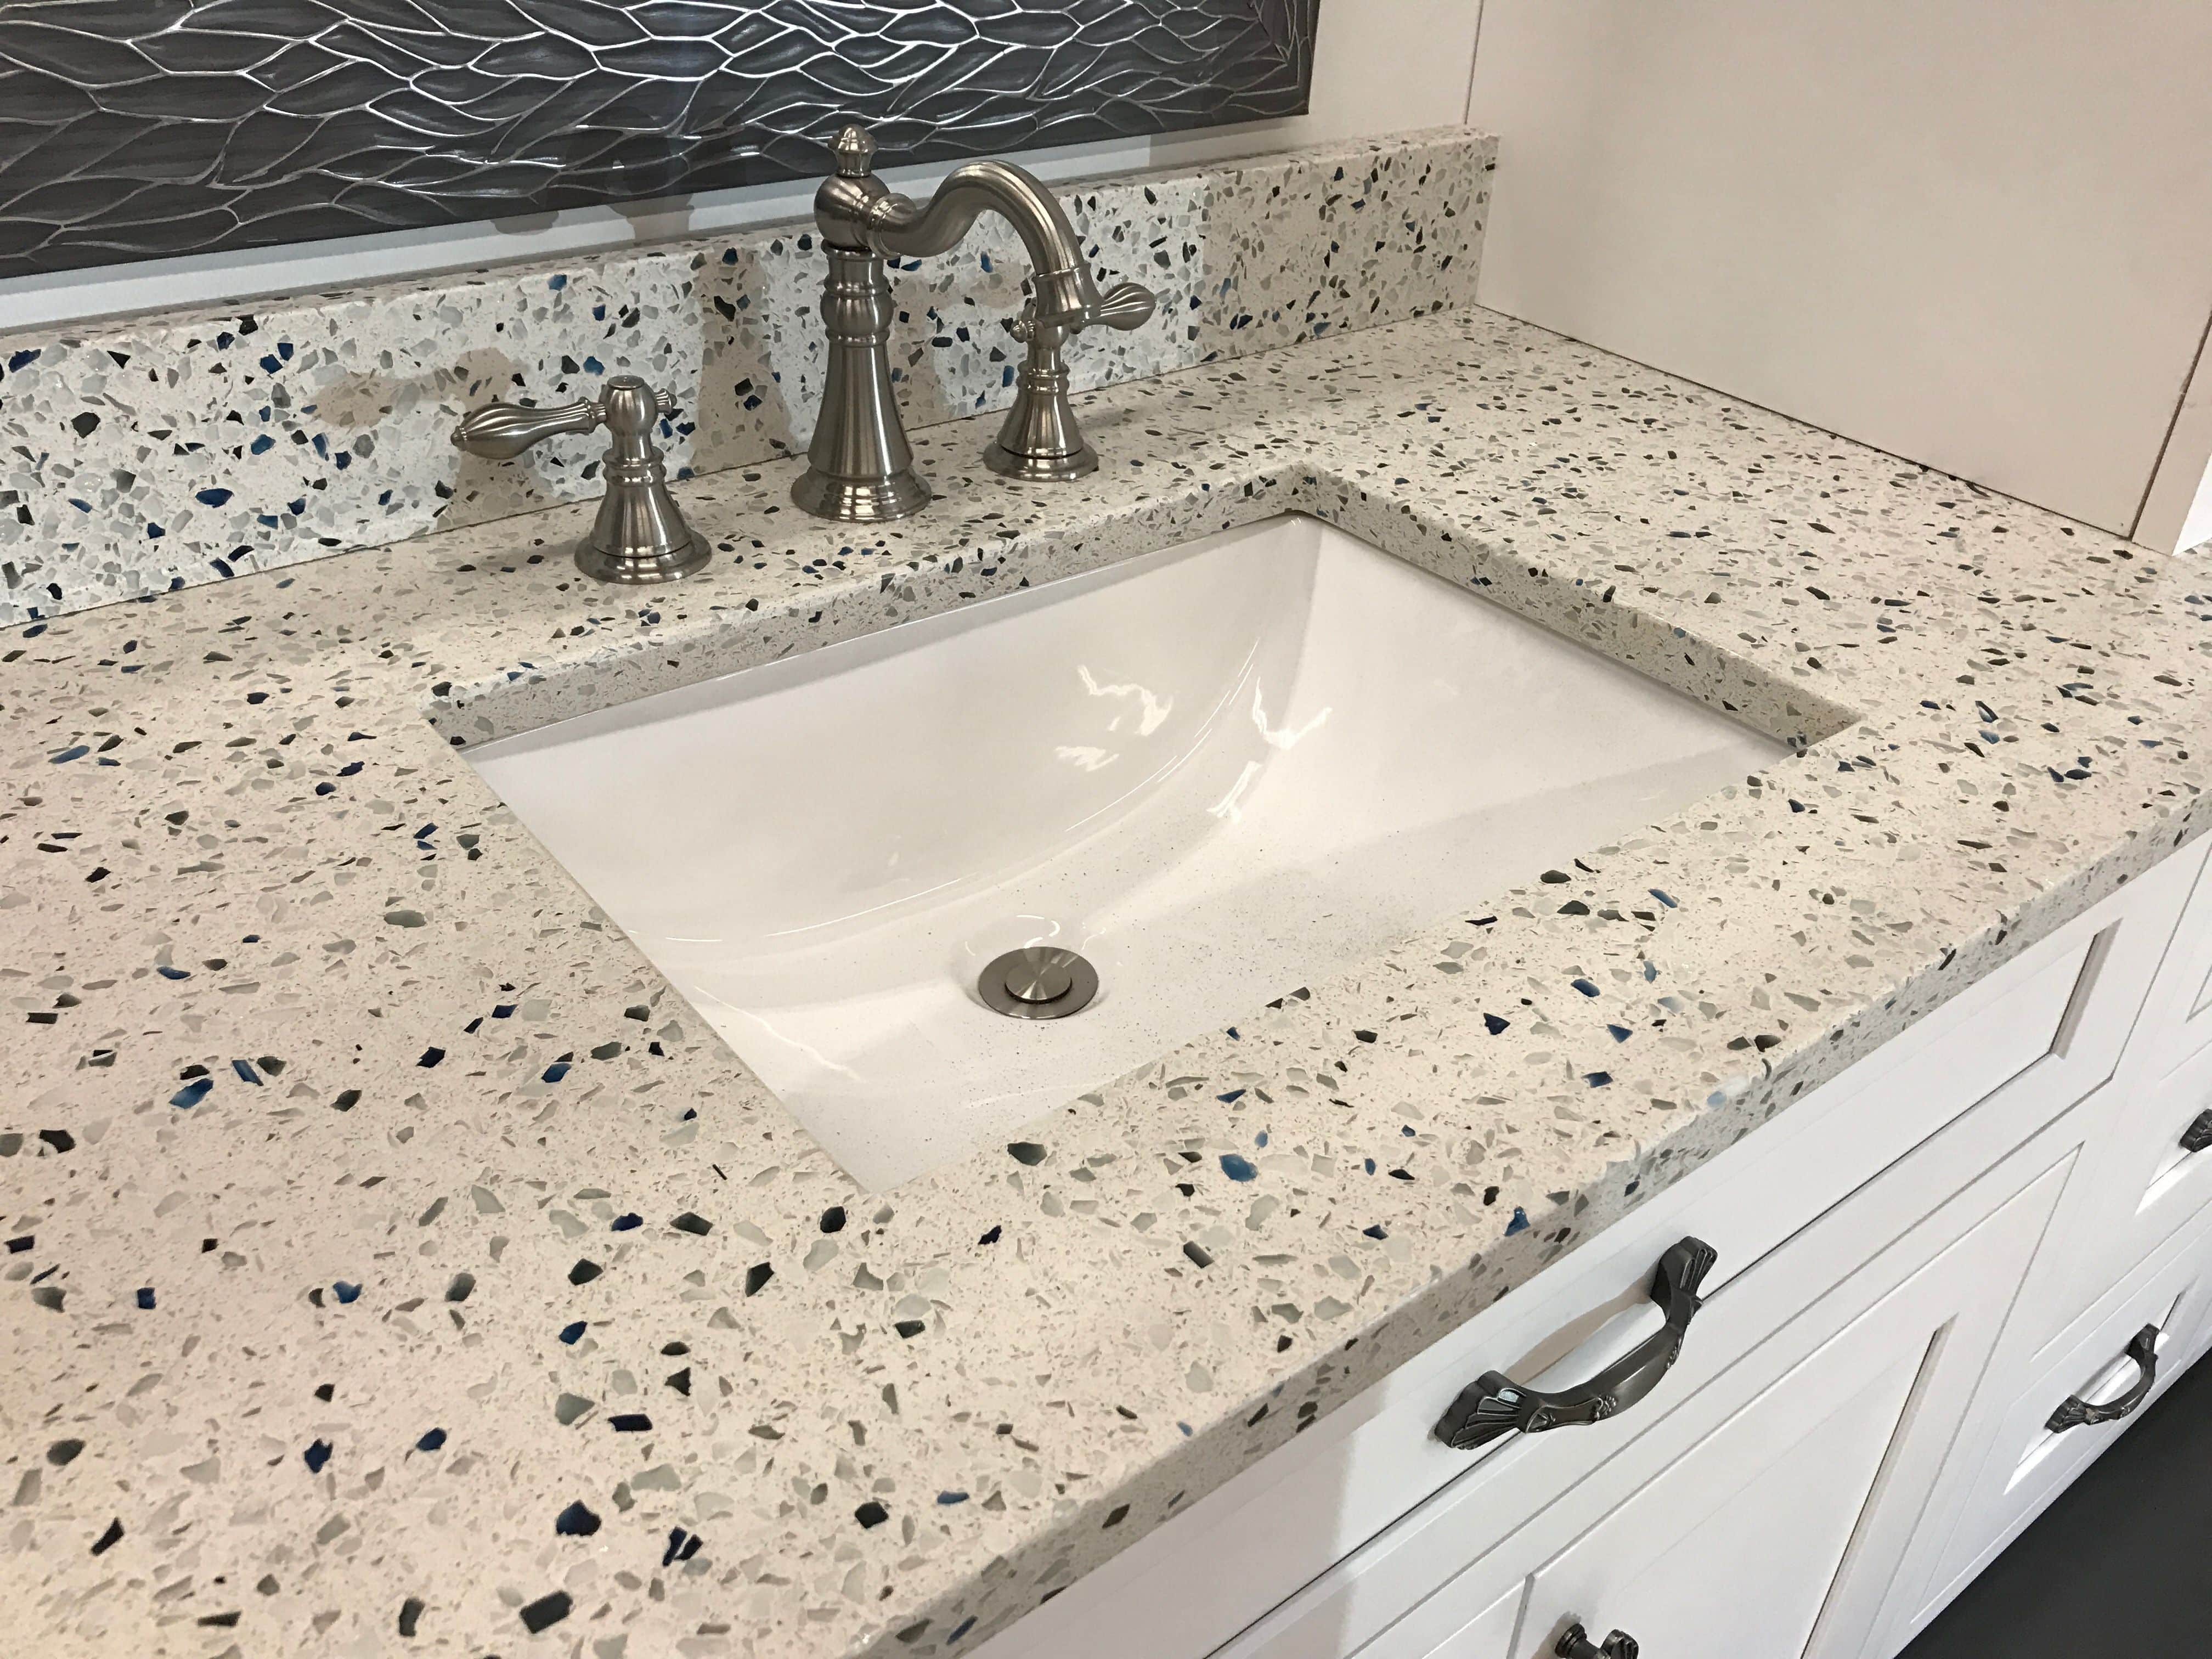 Recycled and composite bathroom counter